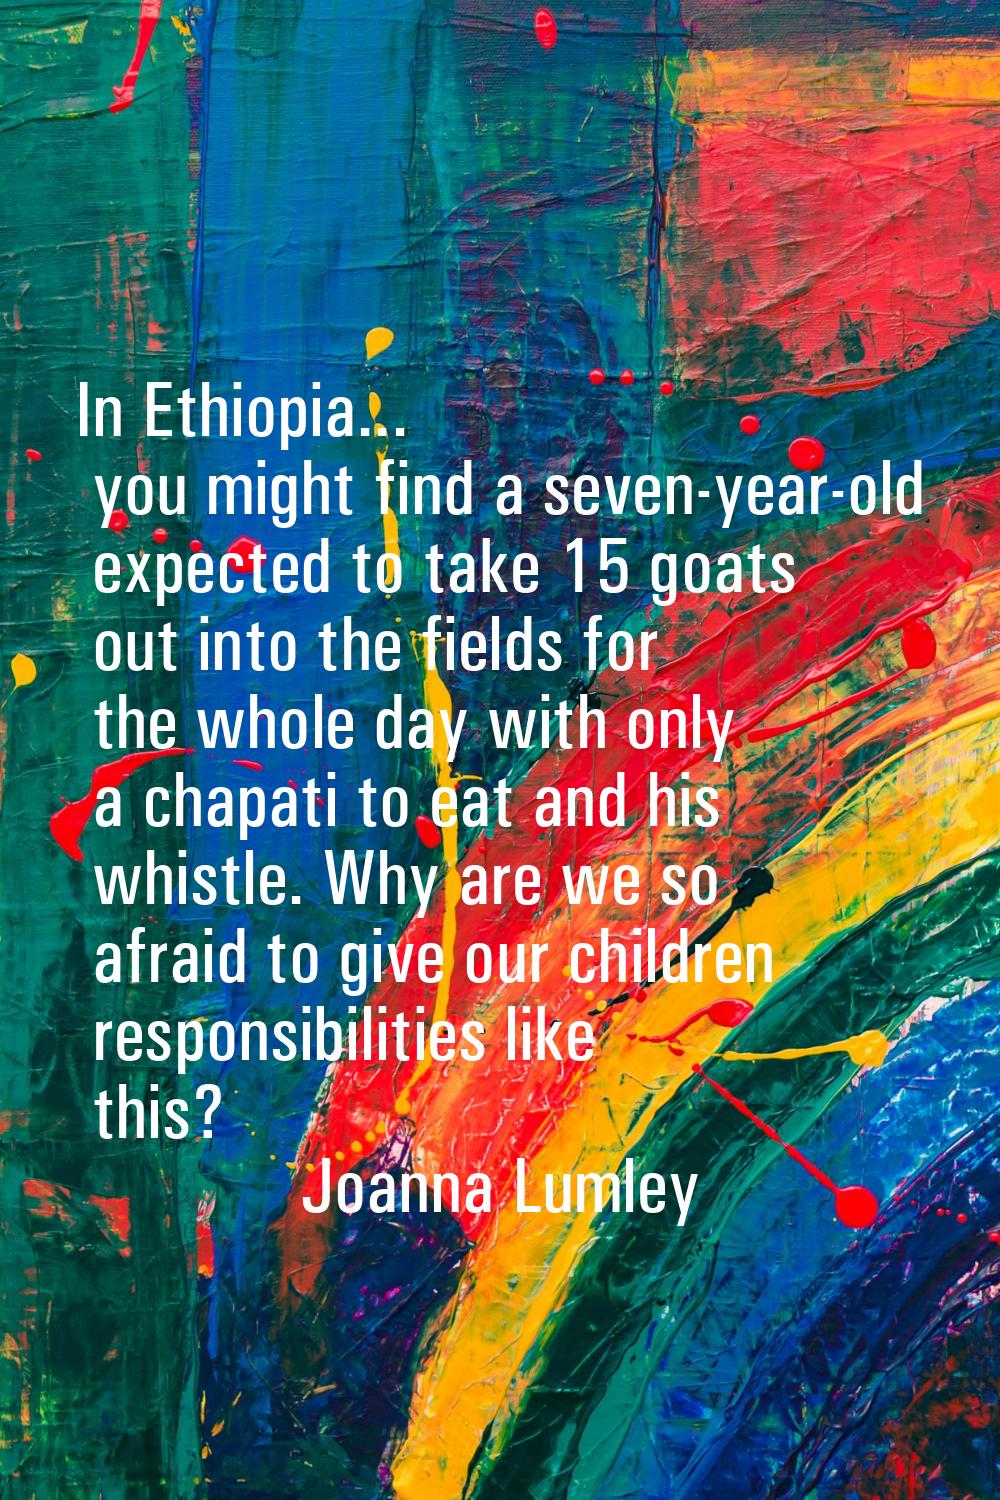 In Ethiopia... you might find a seven-year-old expected to take 15 goats out into the fields for th